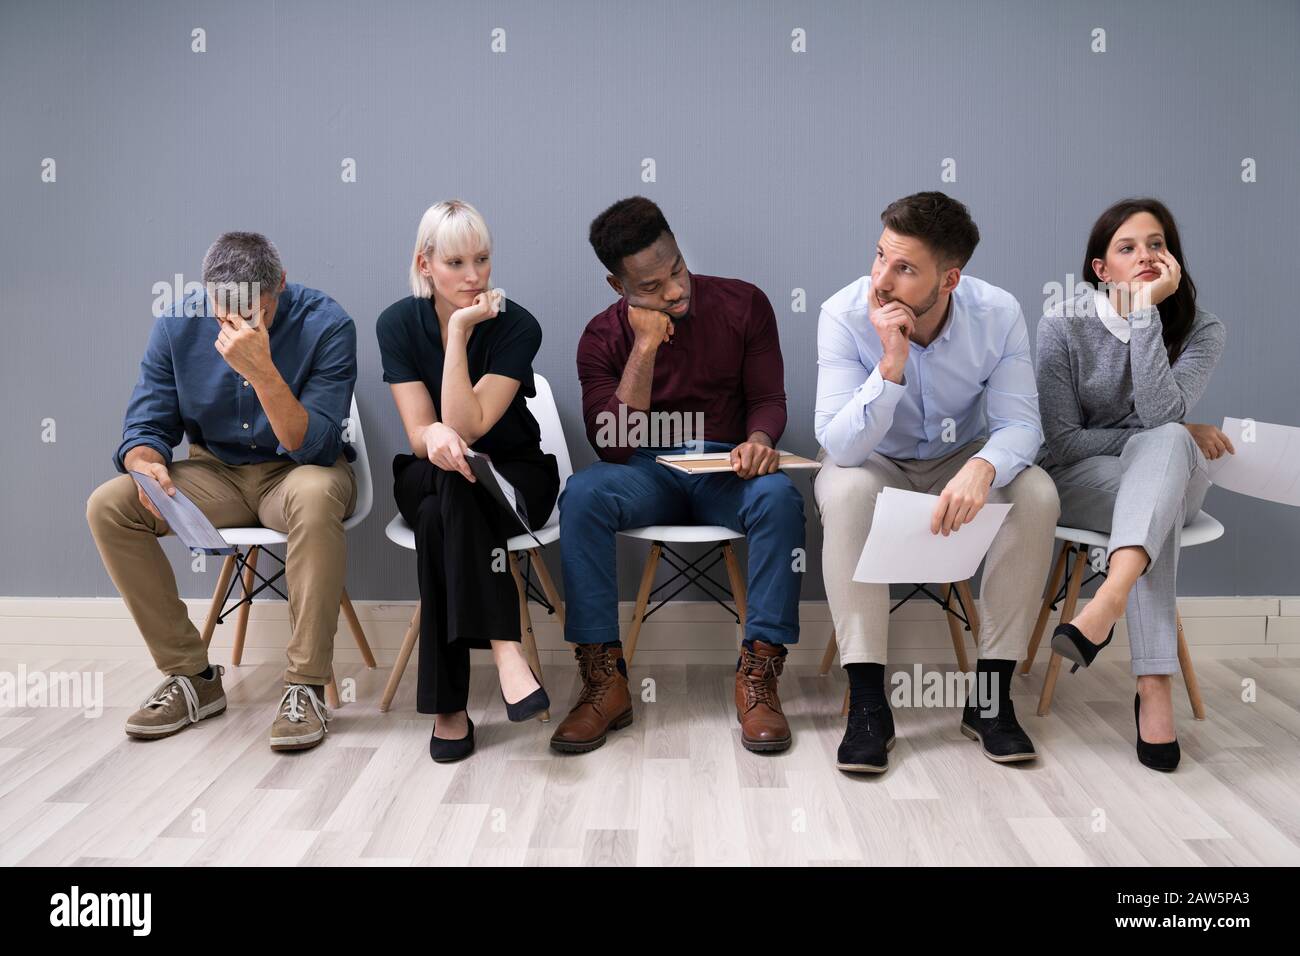 Business People Are Getting Bored While Sitting On Chair Waiting For Job Interview In Office Stock Photo